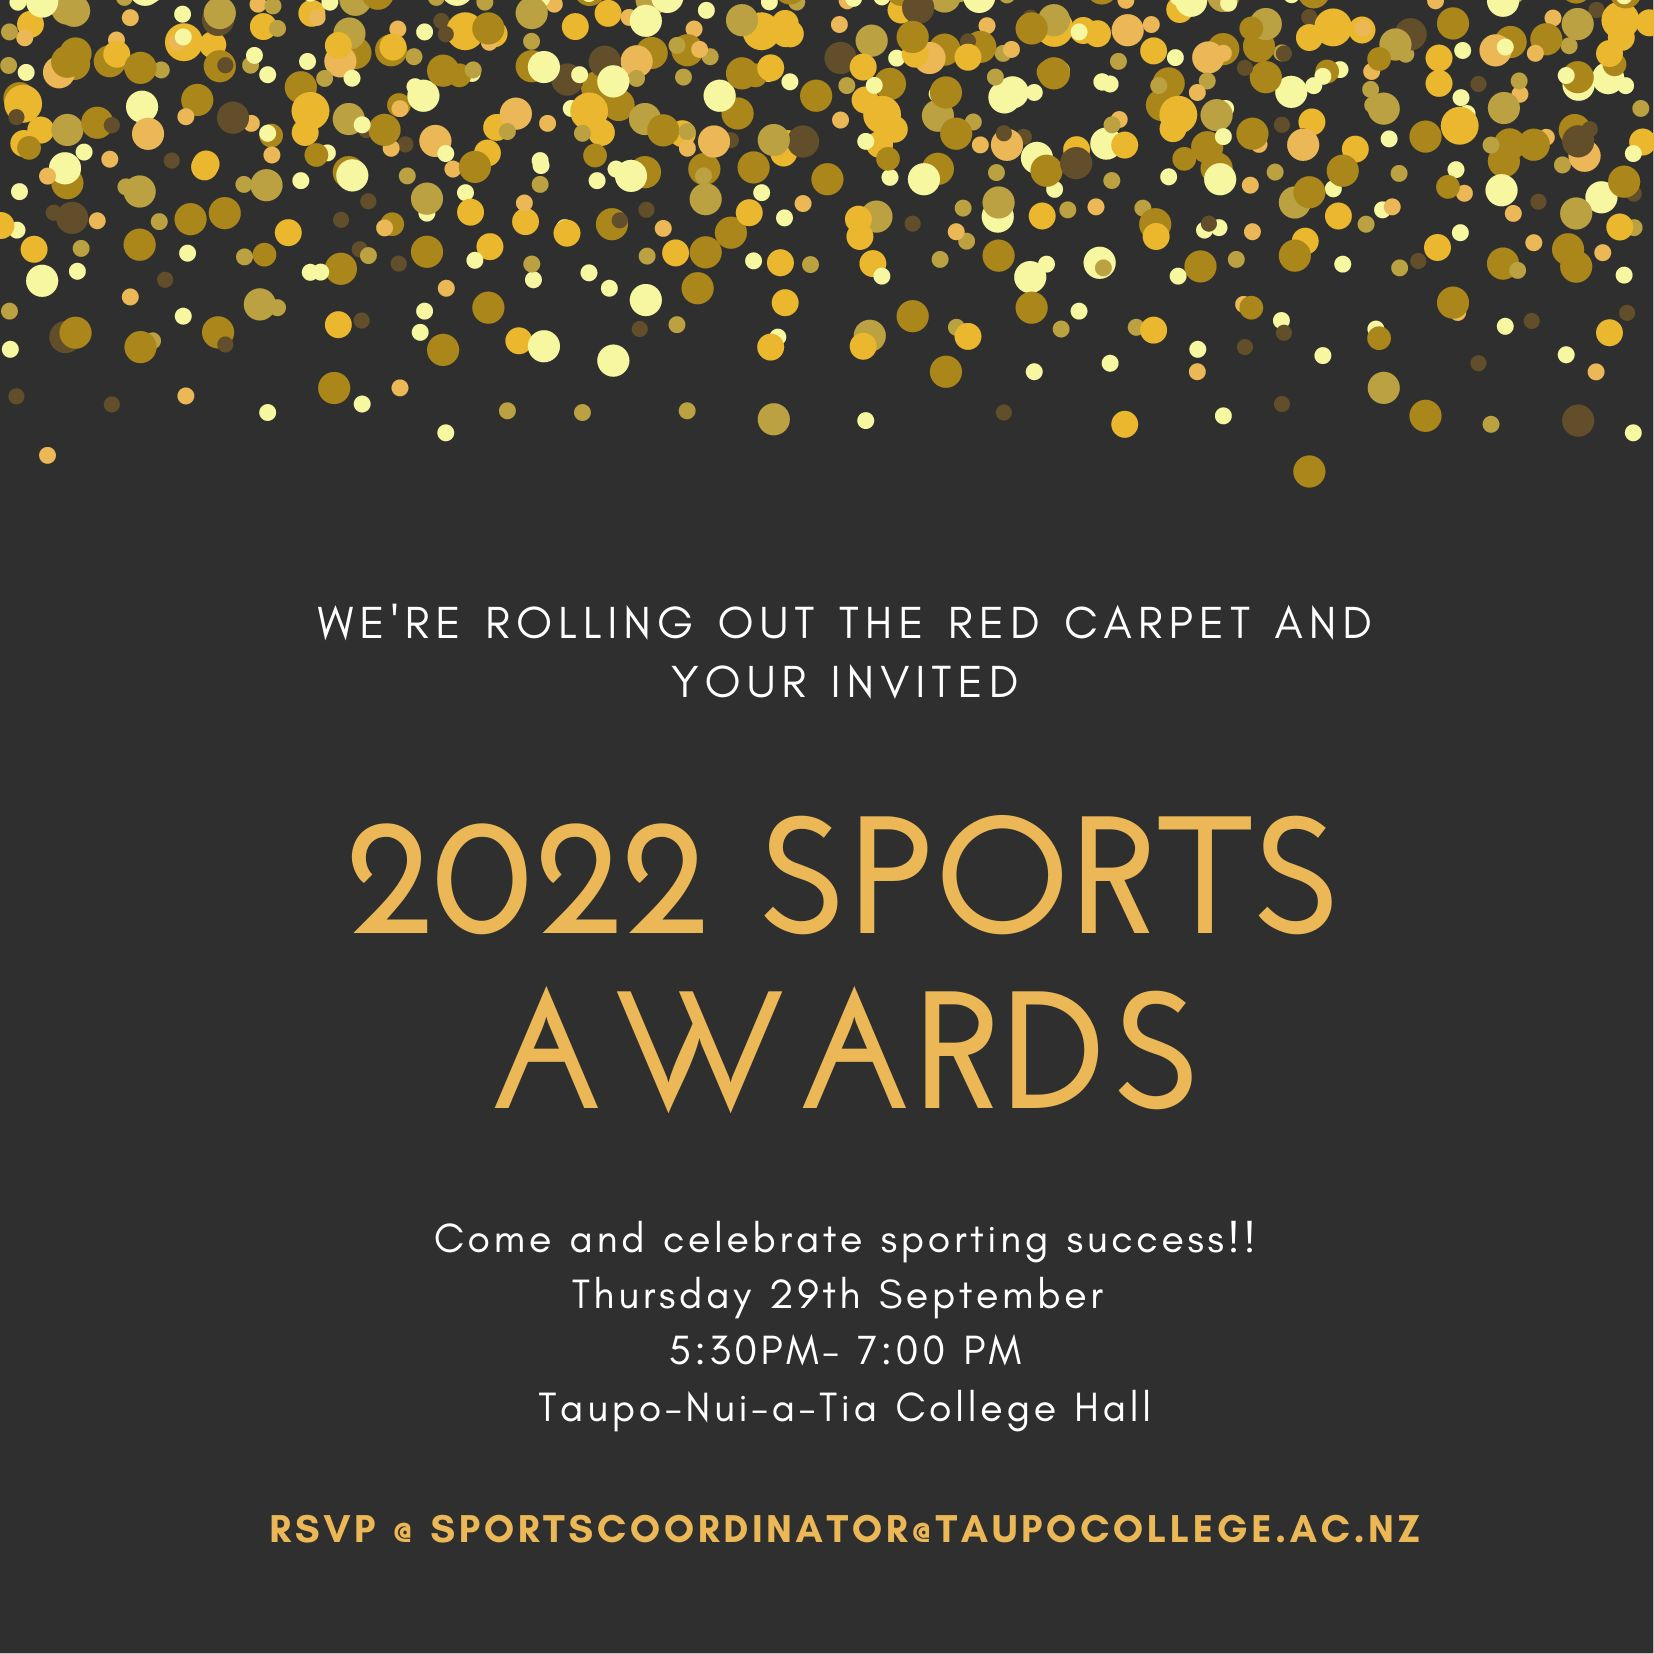 You're invited! Sports Awards 2022